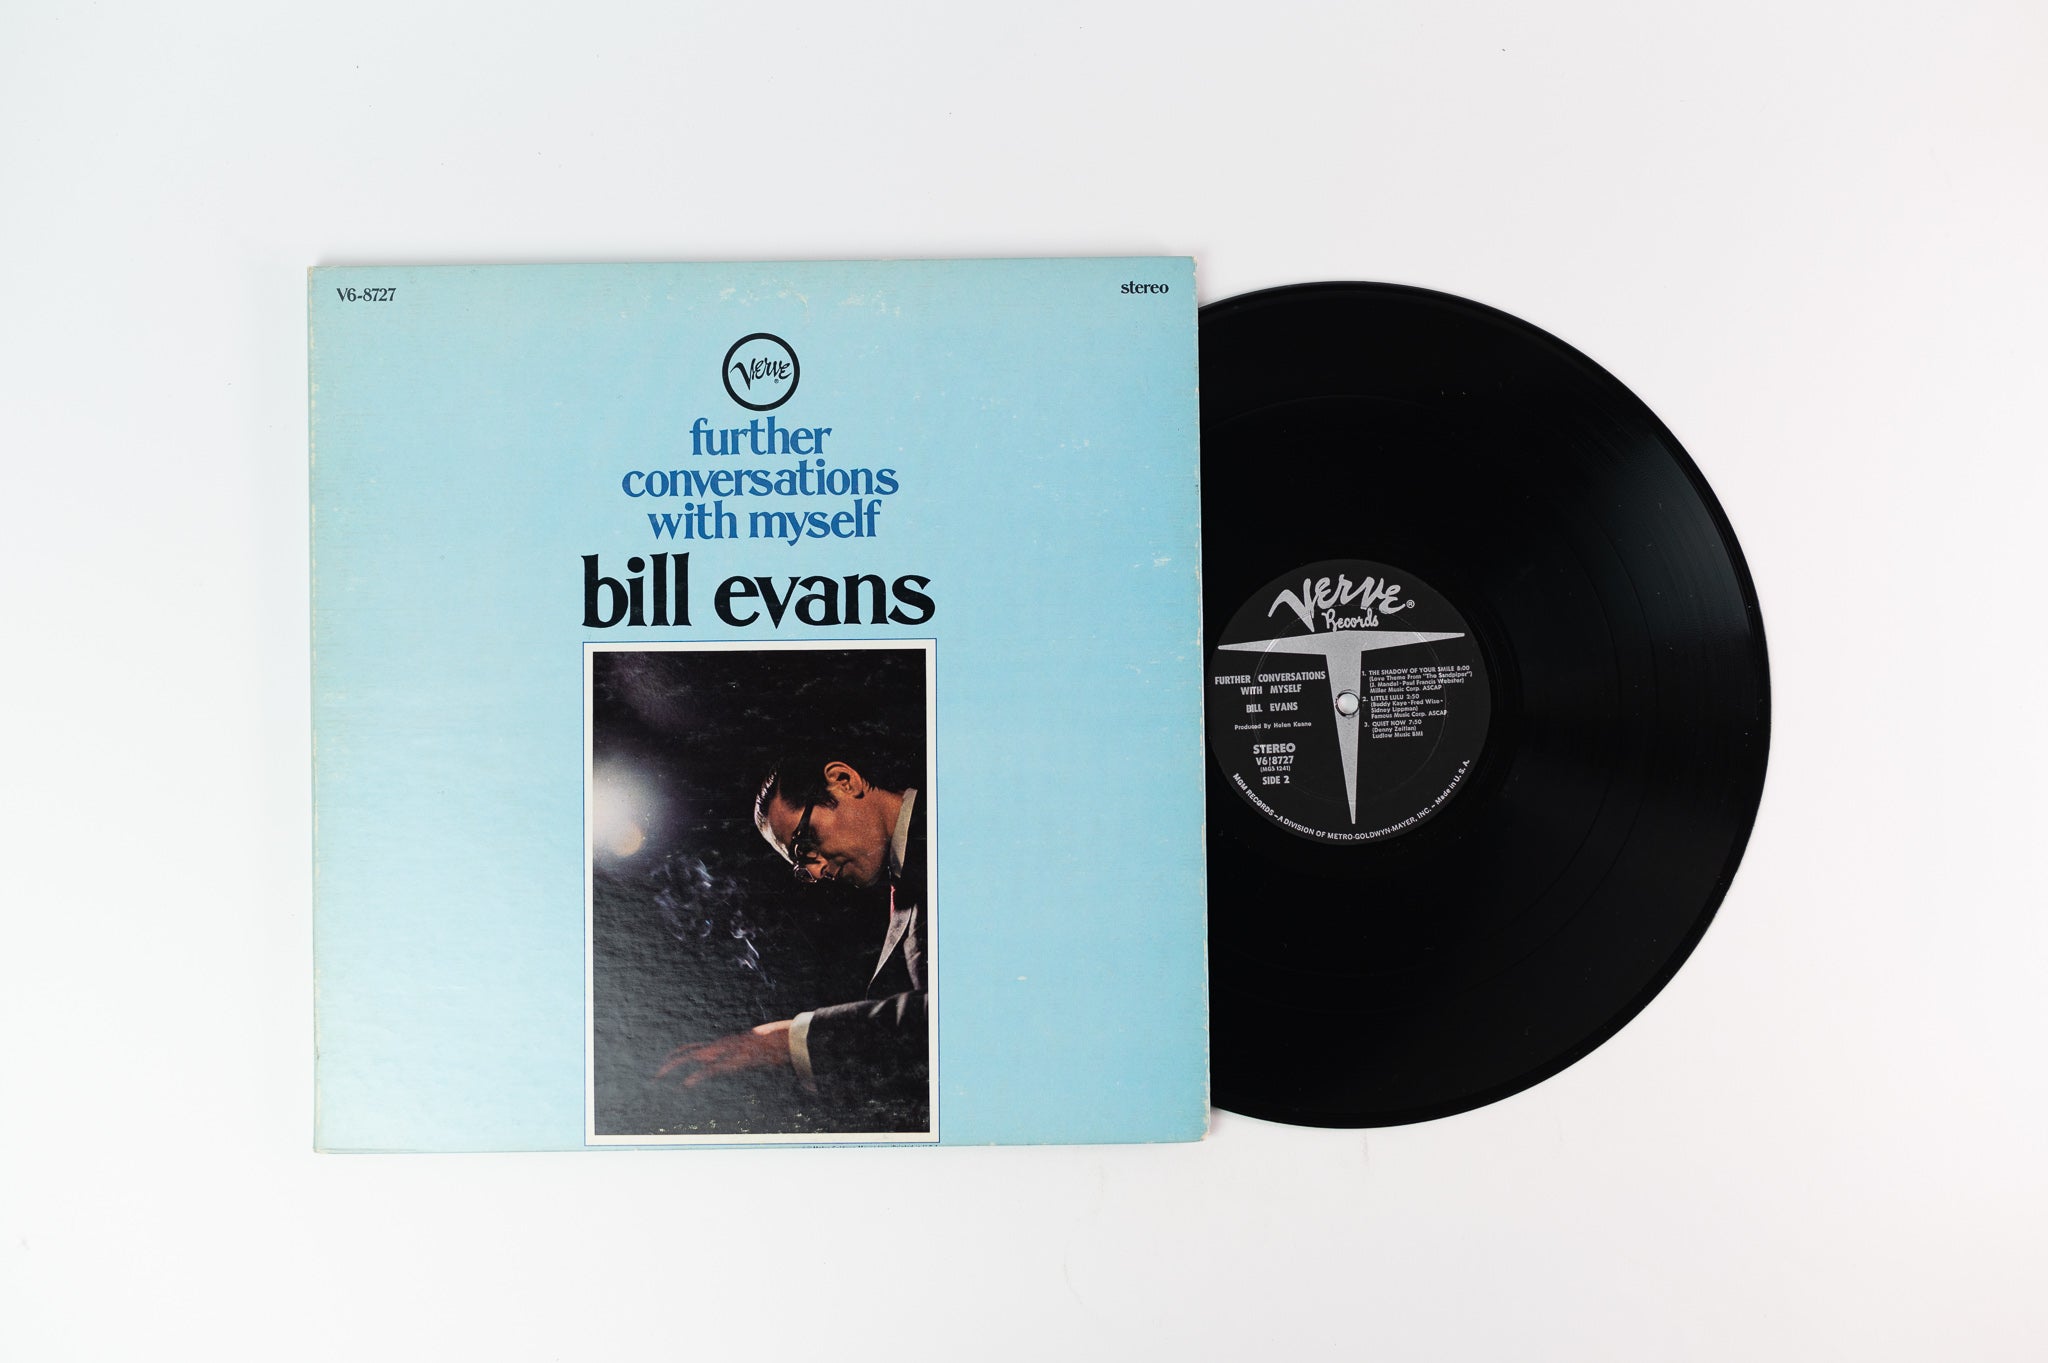 Bill Evans - Further Conversations With Myself on Verve Stereo